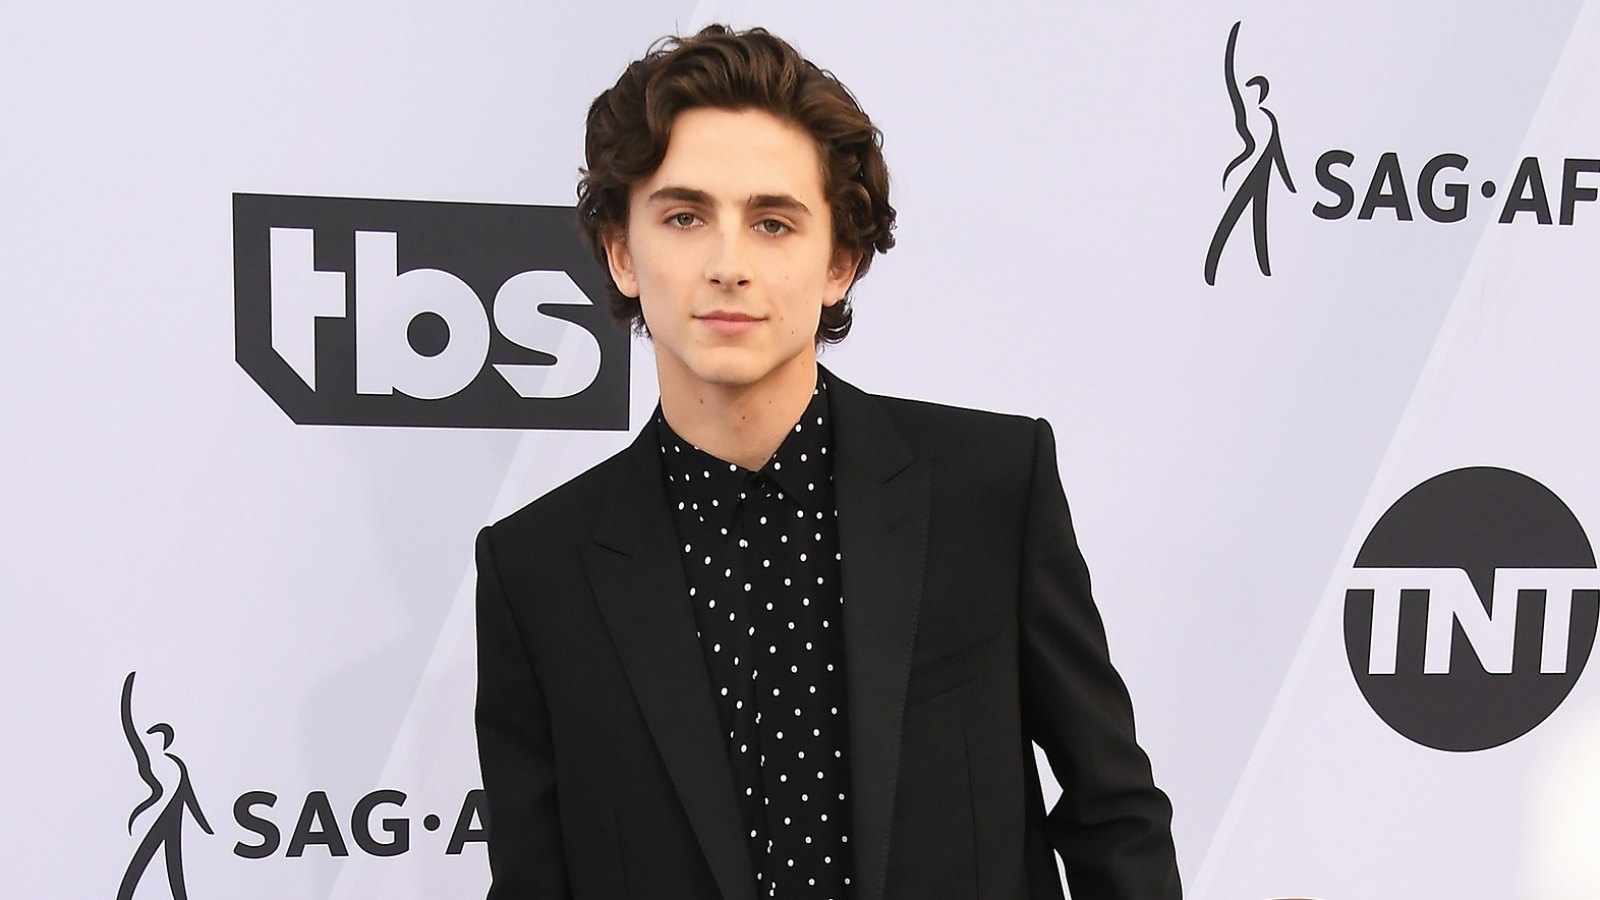 Timothee Chalamet Name-Drops Armie Hammer Offers to FaceTime Steve Carell While Flying Coach Next to Superfan